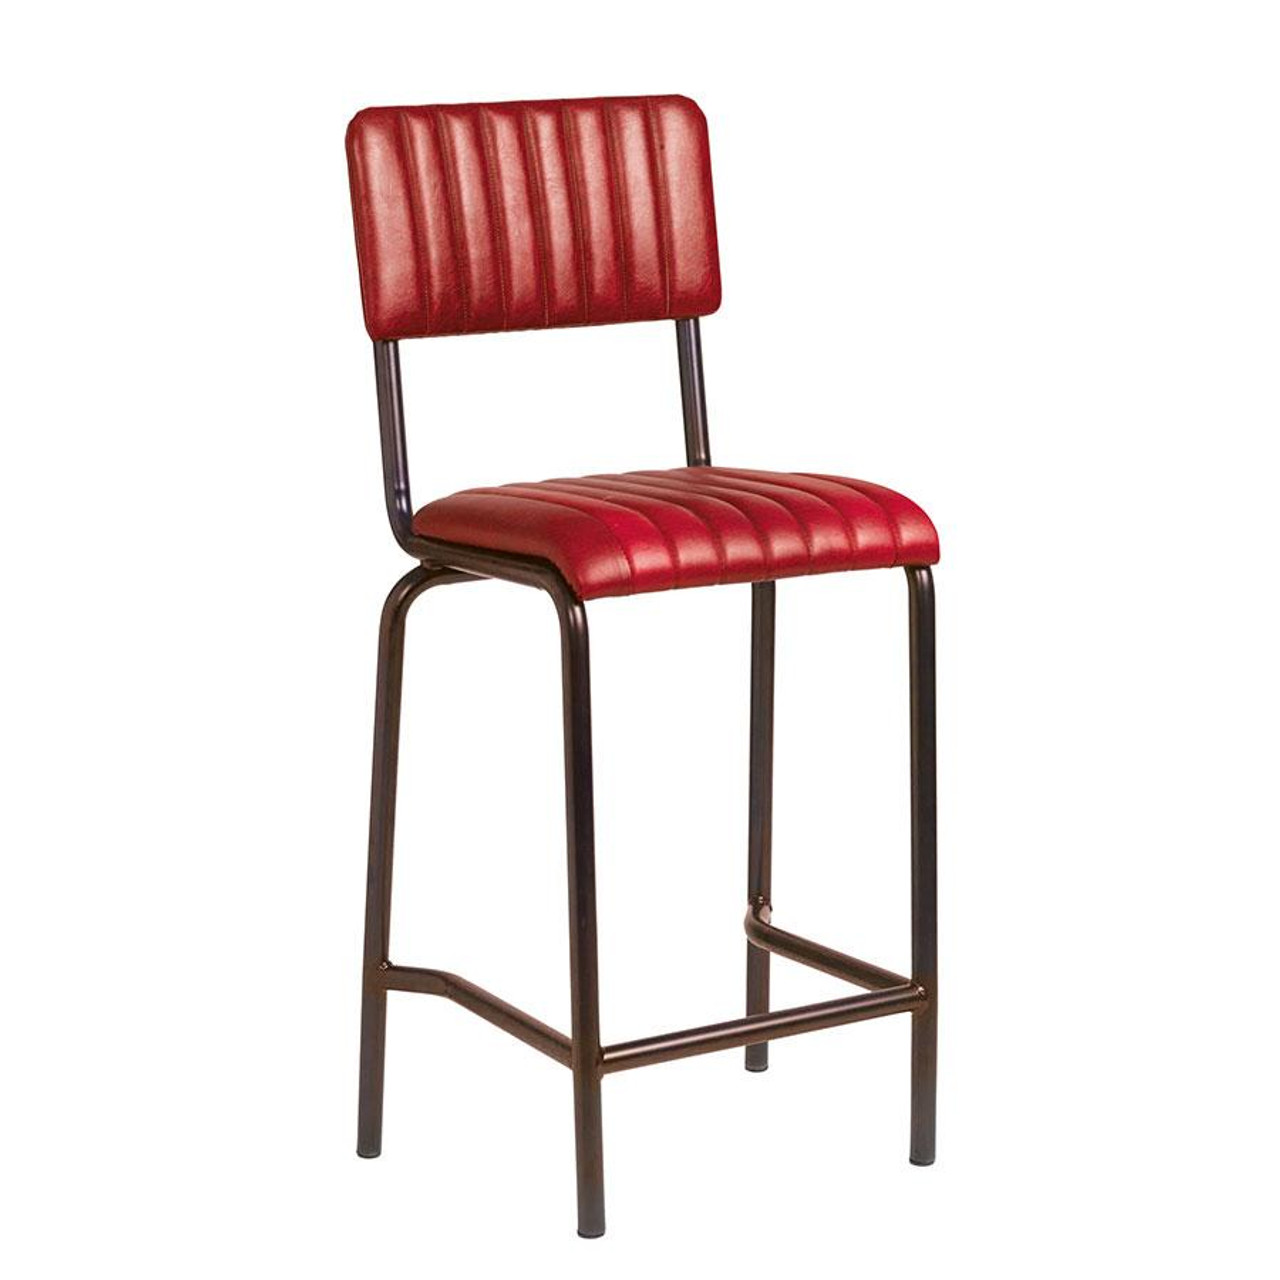 Core Mid Bar Stool Vintage Red - Simply Bar Stools